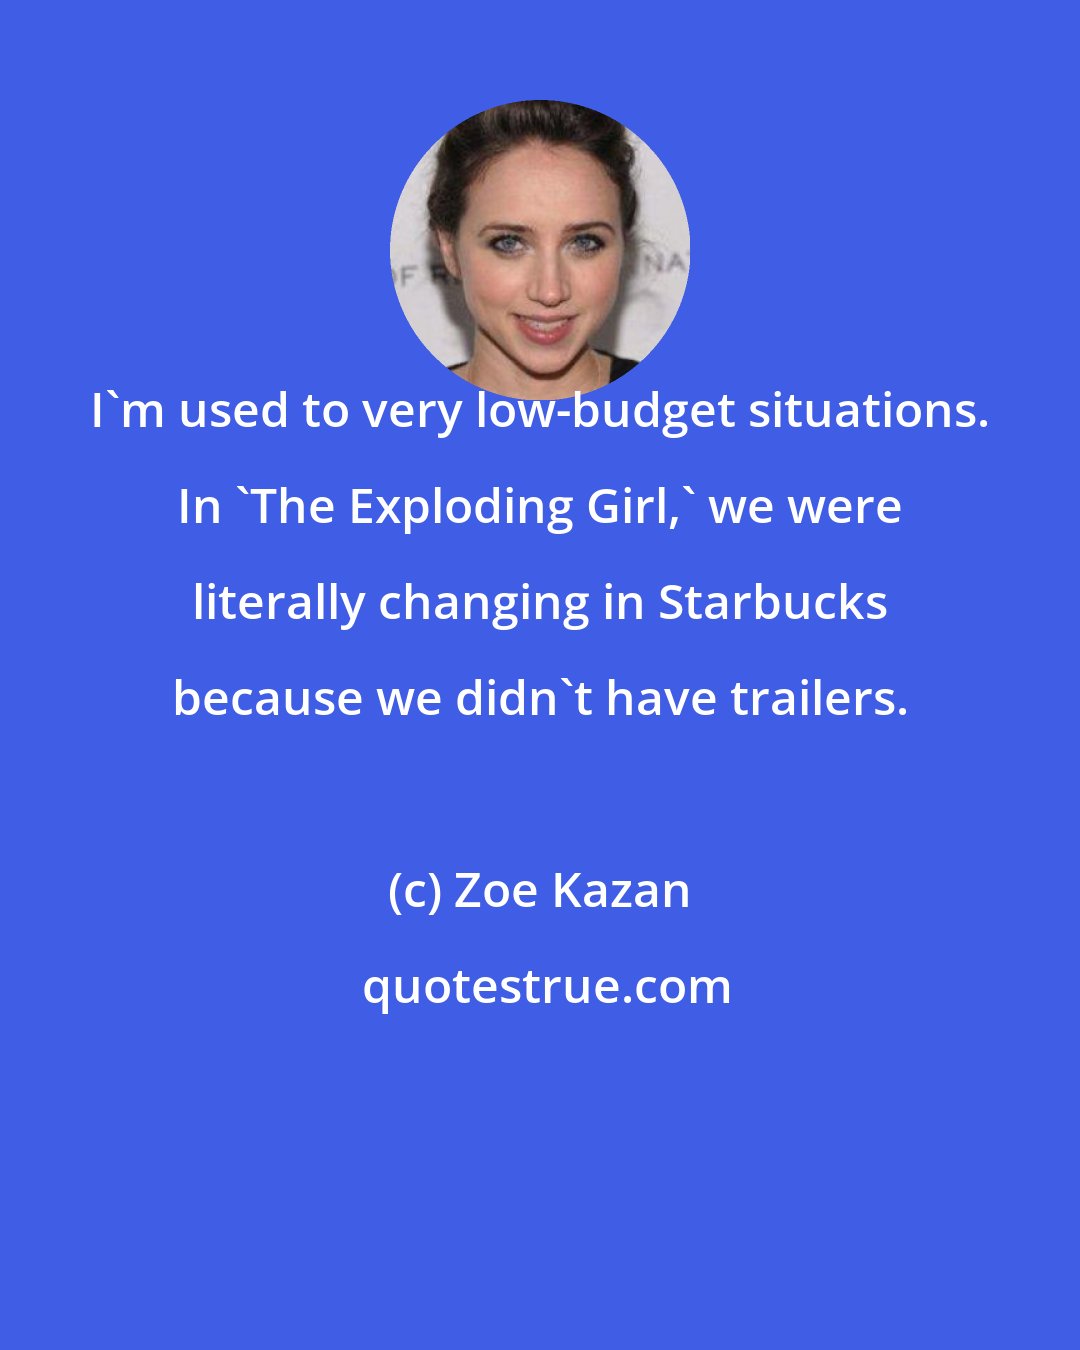 Zoe Kazan: I'm used to very low-budget situations. In 'The Exploding Girl,' we were literally changing in Starbucks because we didn't have trailers.